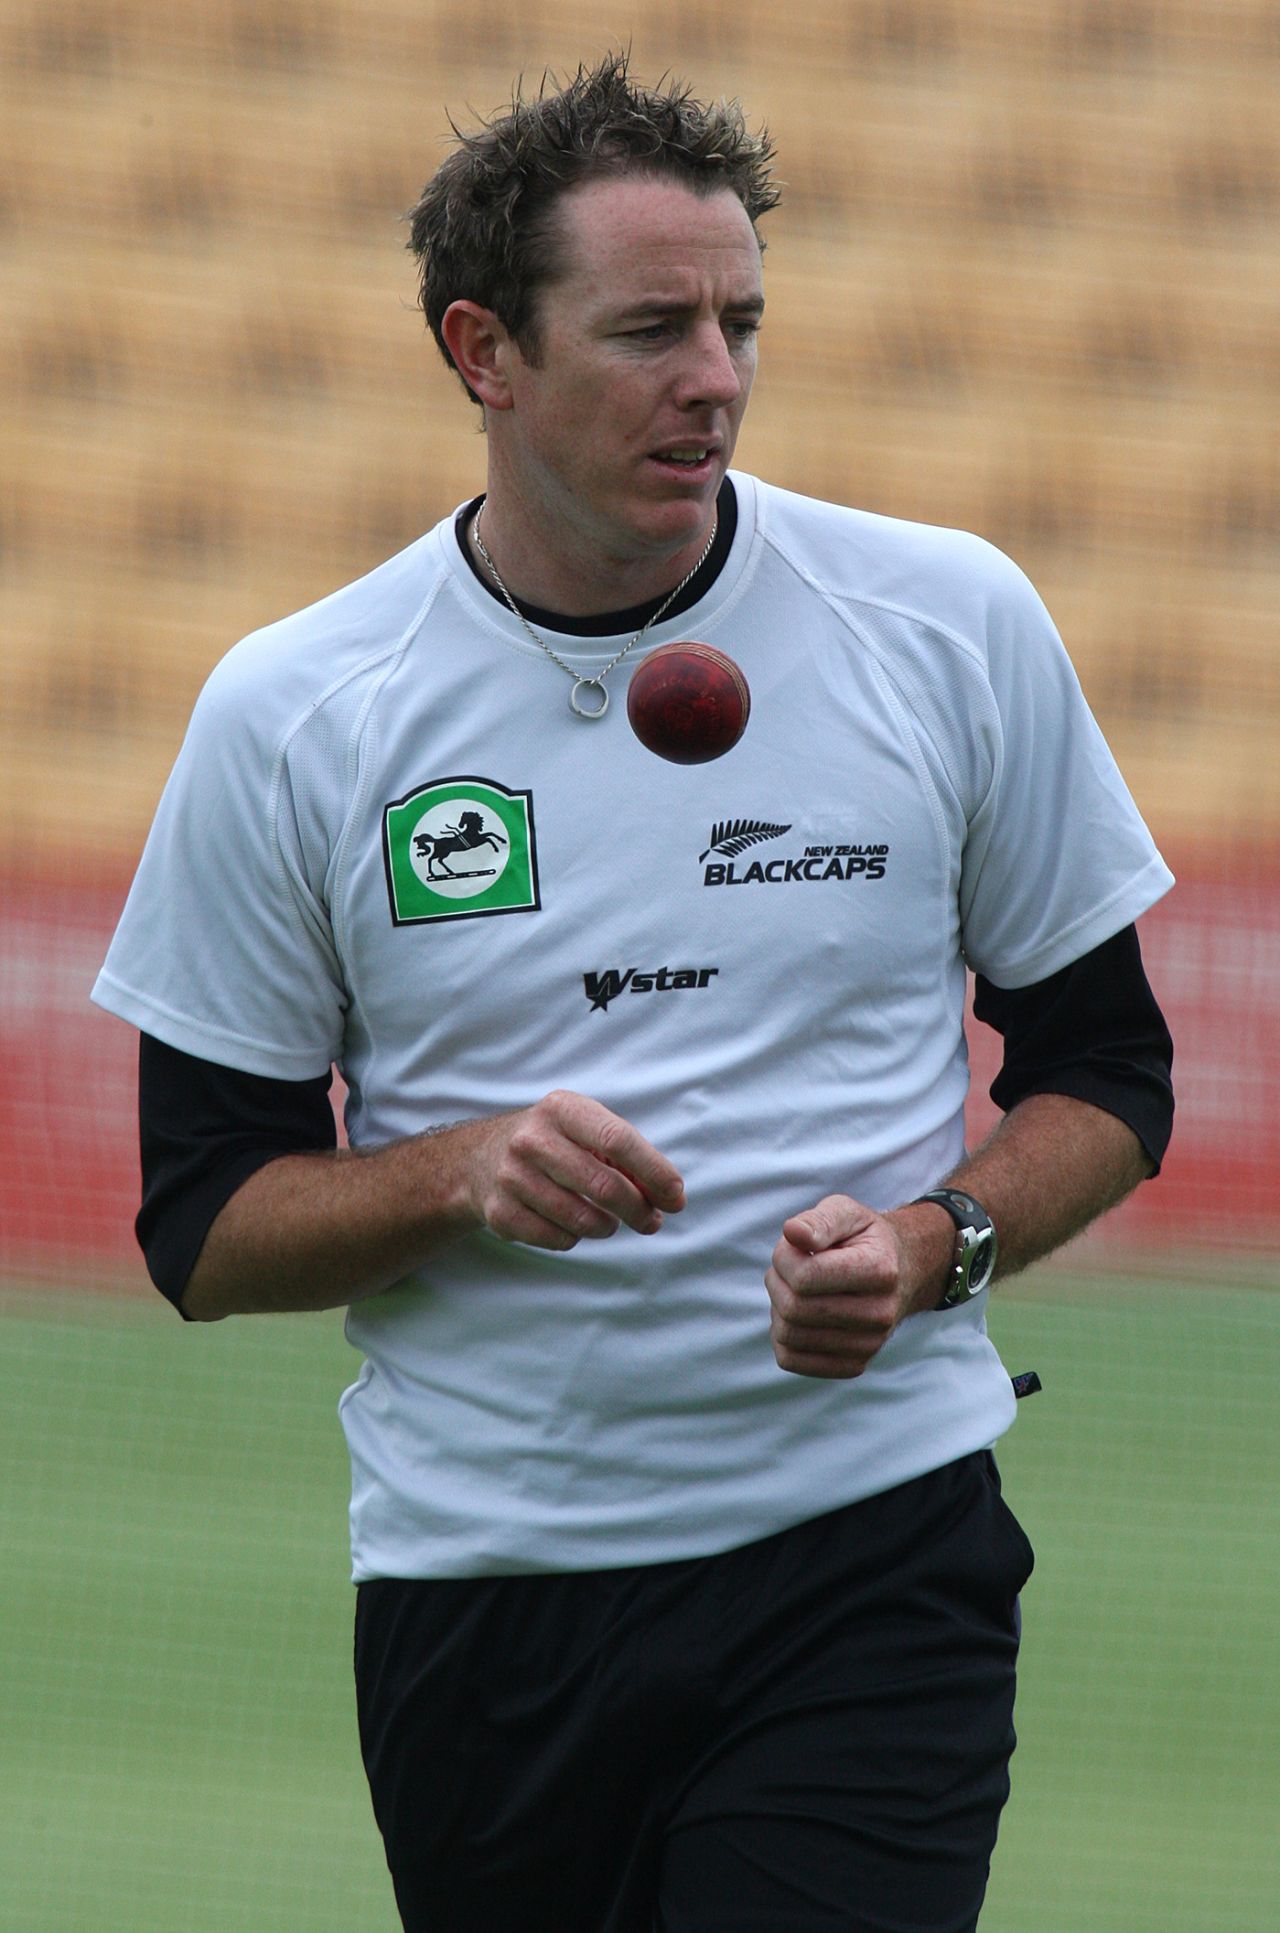 Iain O'Brien at a practice session before the game, Northamptonshire v New Zealand, day three, County Ground, 1 June 2008